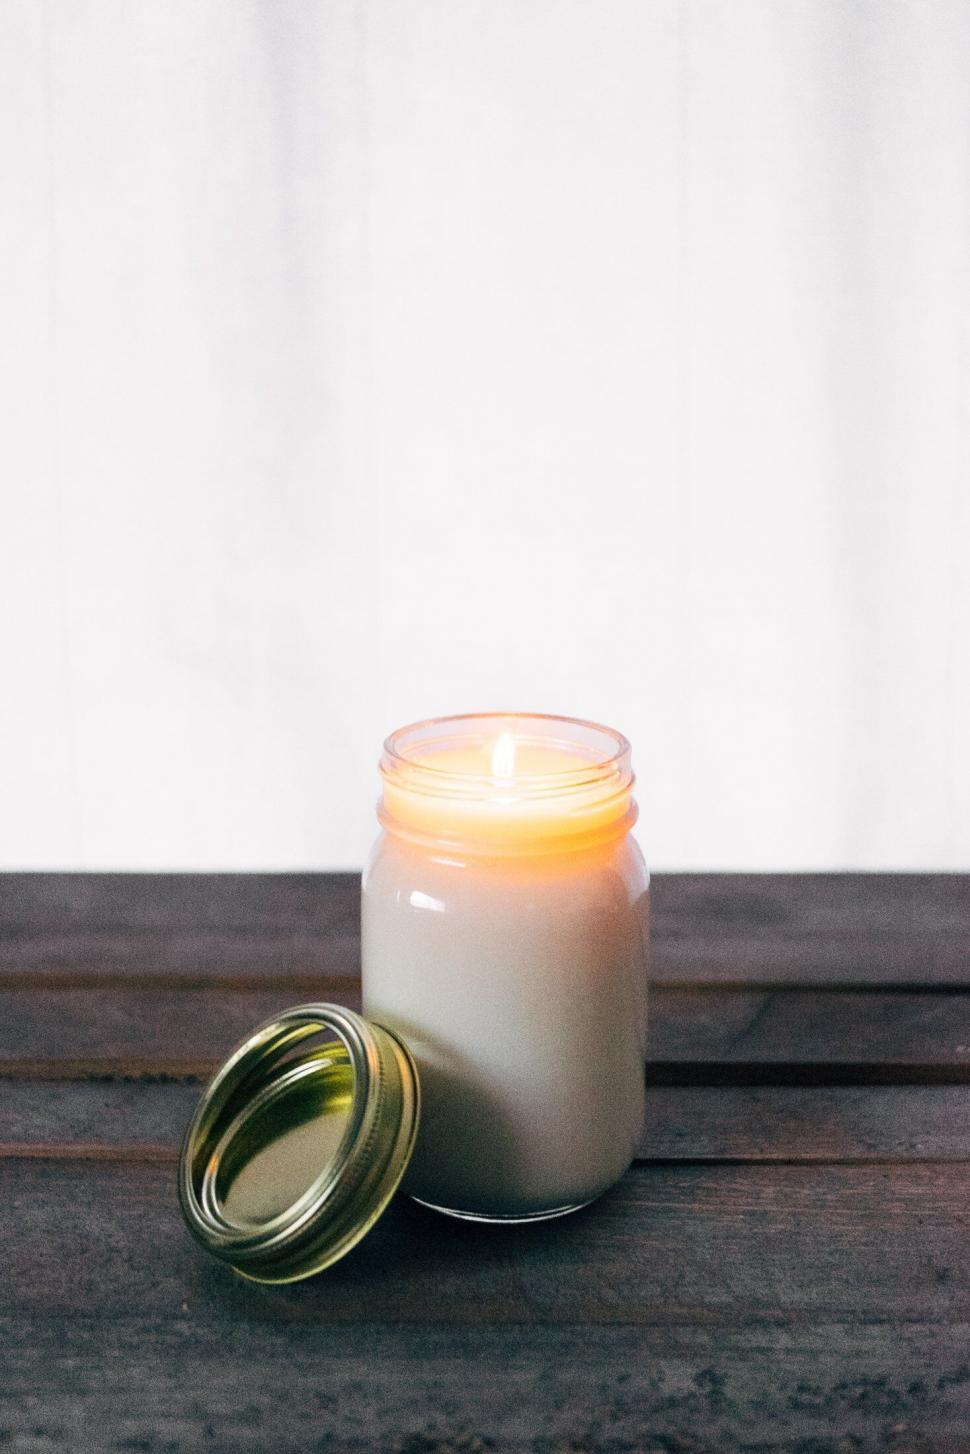 Free Image of Lit candle on wood clean background 